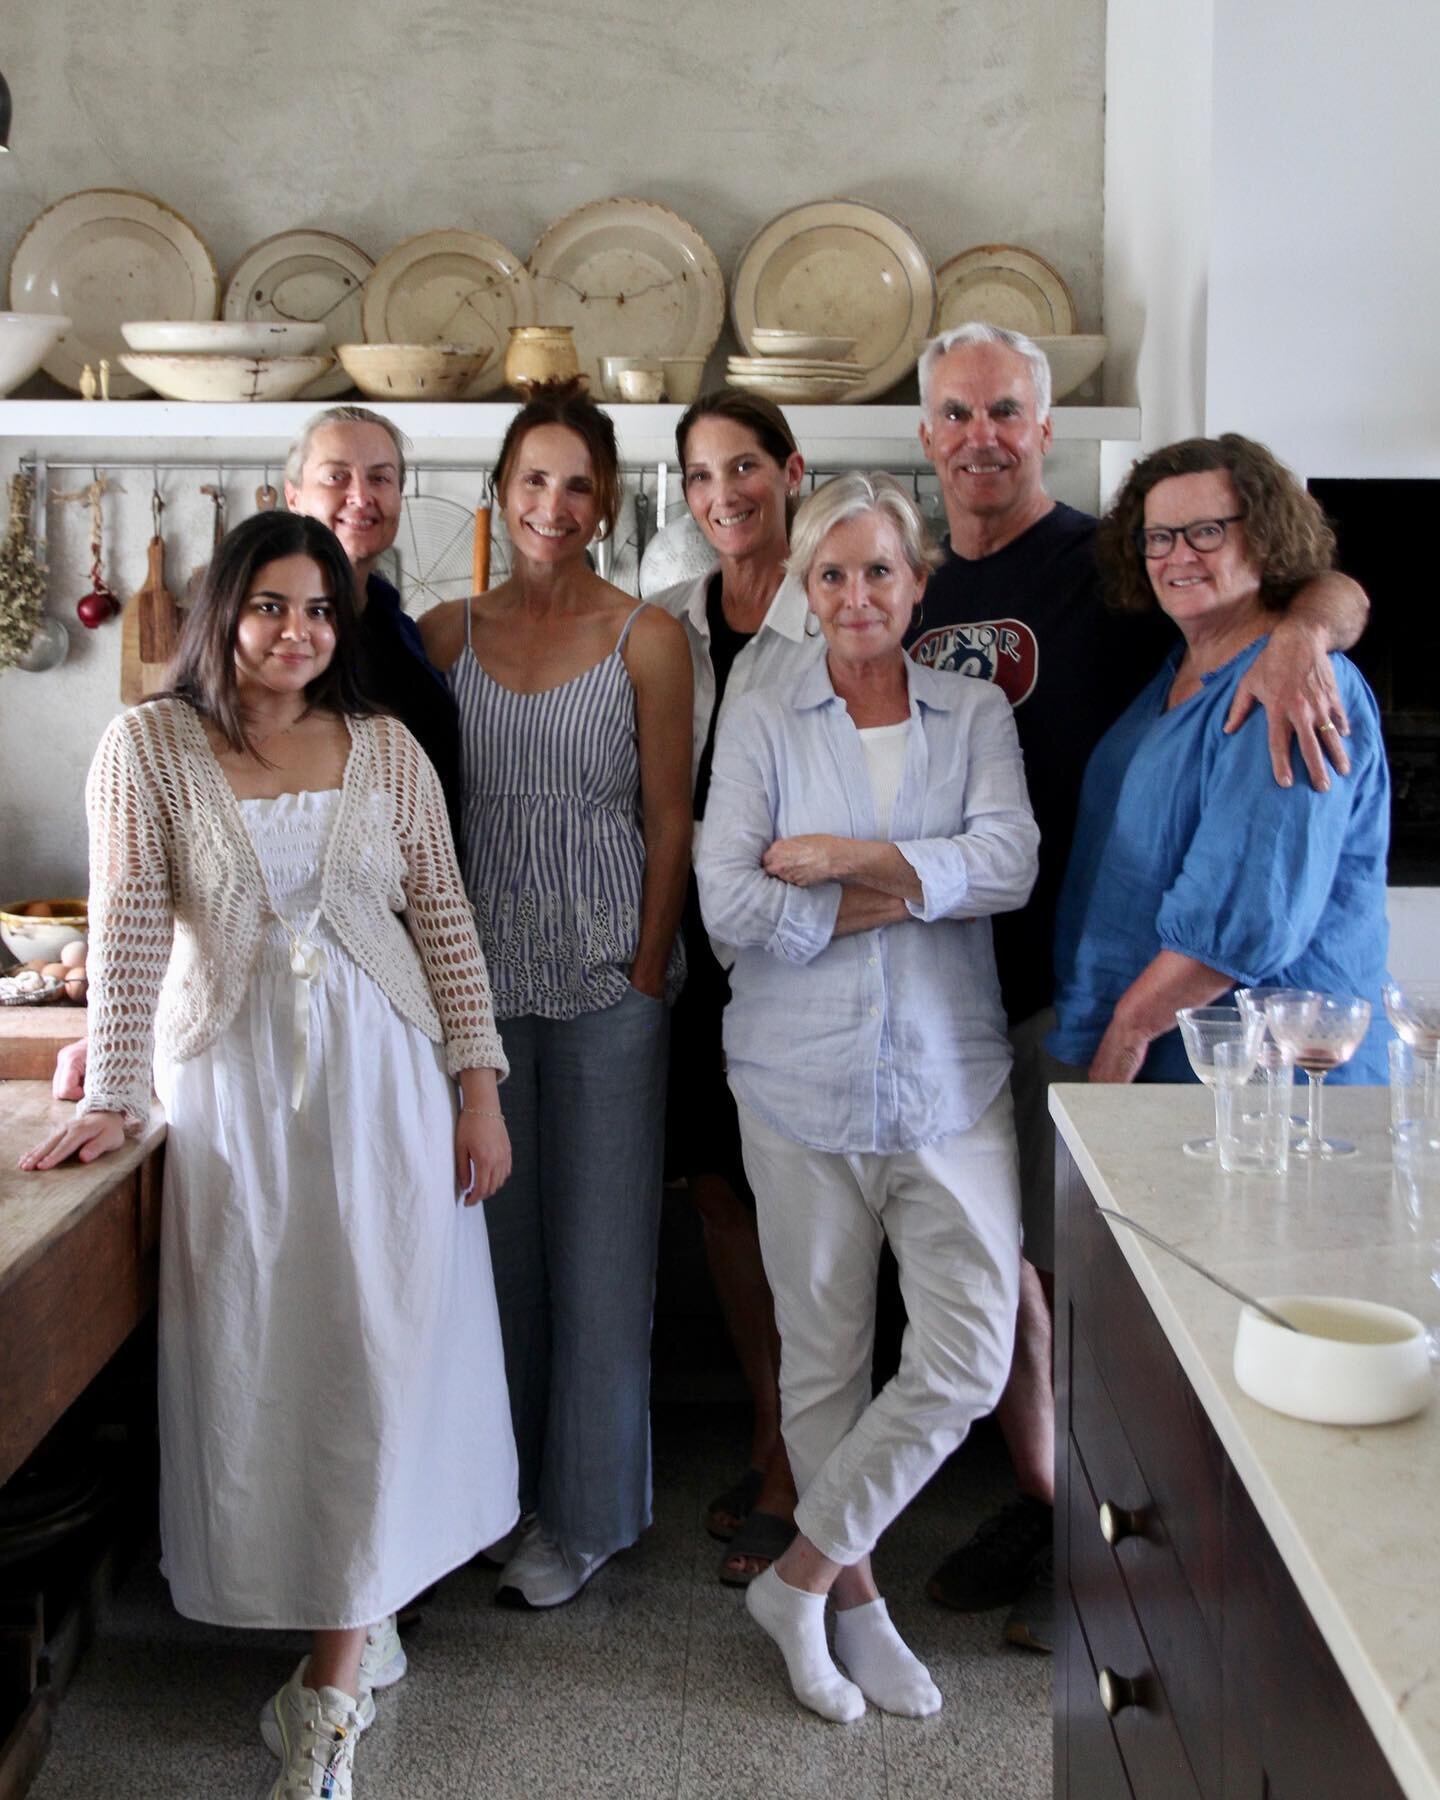 Our Cooking Puglia workshop wrapped up this past week and these lovely people made it a magical five days. We did a whole lot of cooking and eating, and spent time with our friends and family in Altamura and Oria. We explored Matera and picked up som